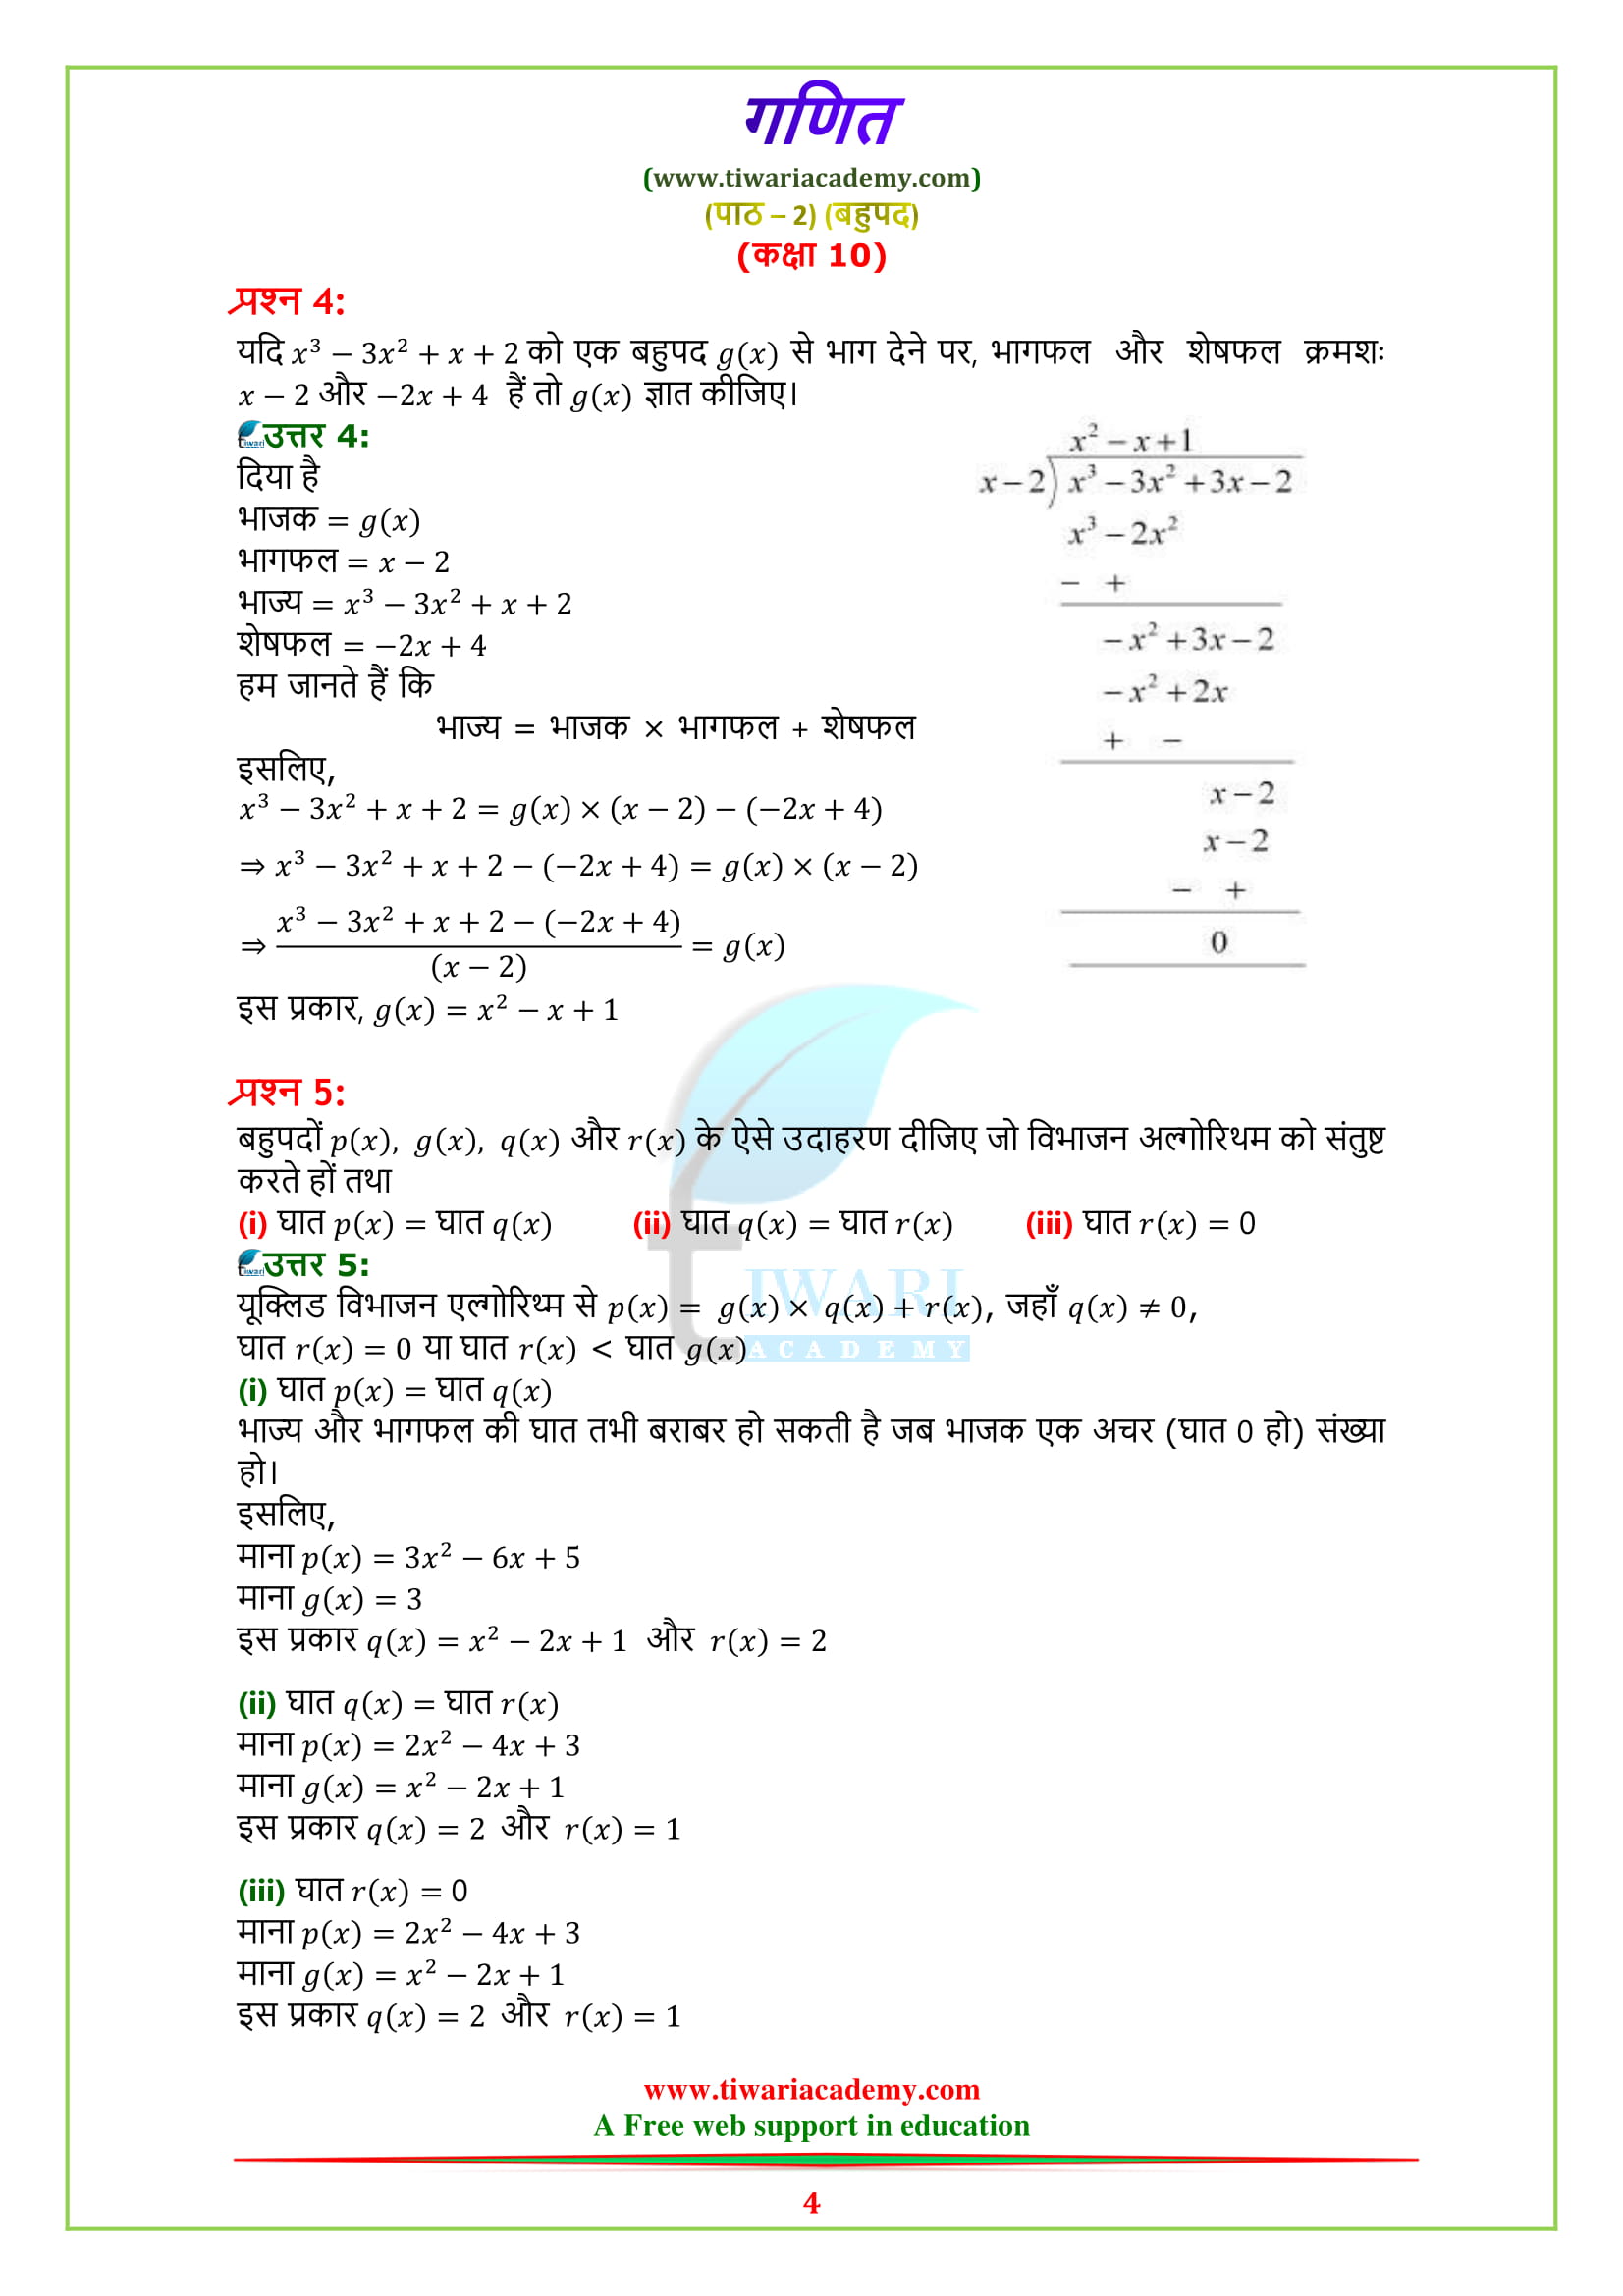 Class 10 maths chapter 2 exercise 2.3 for 2018-19